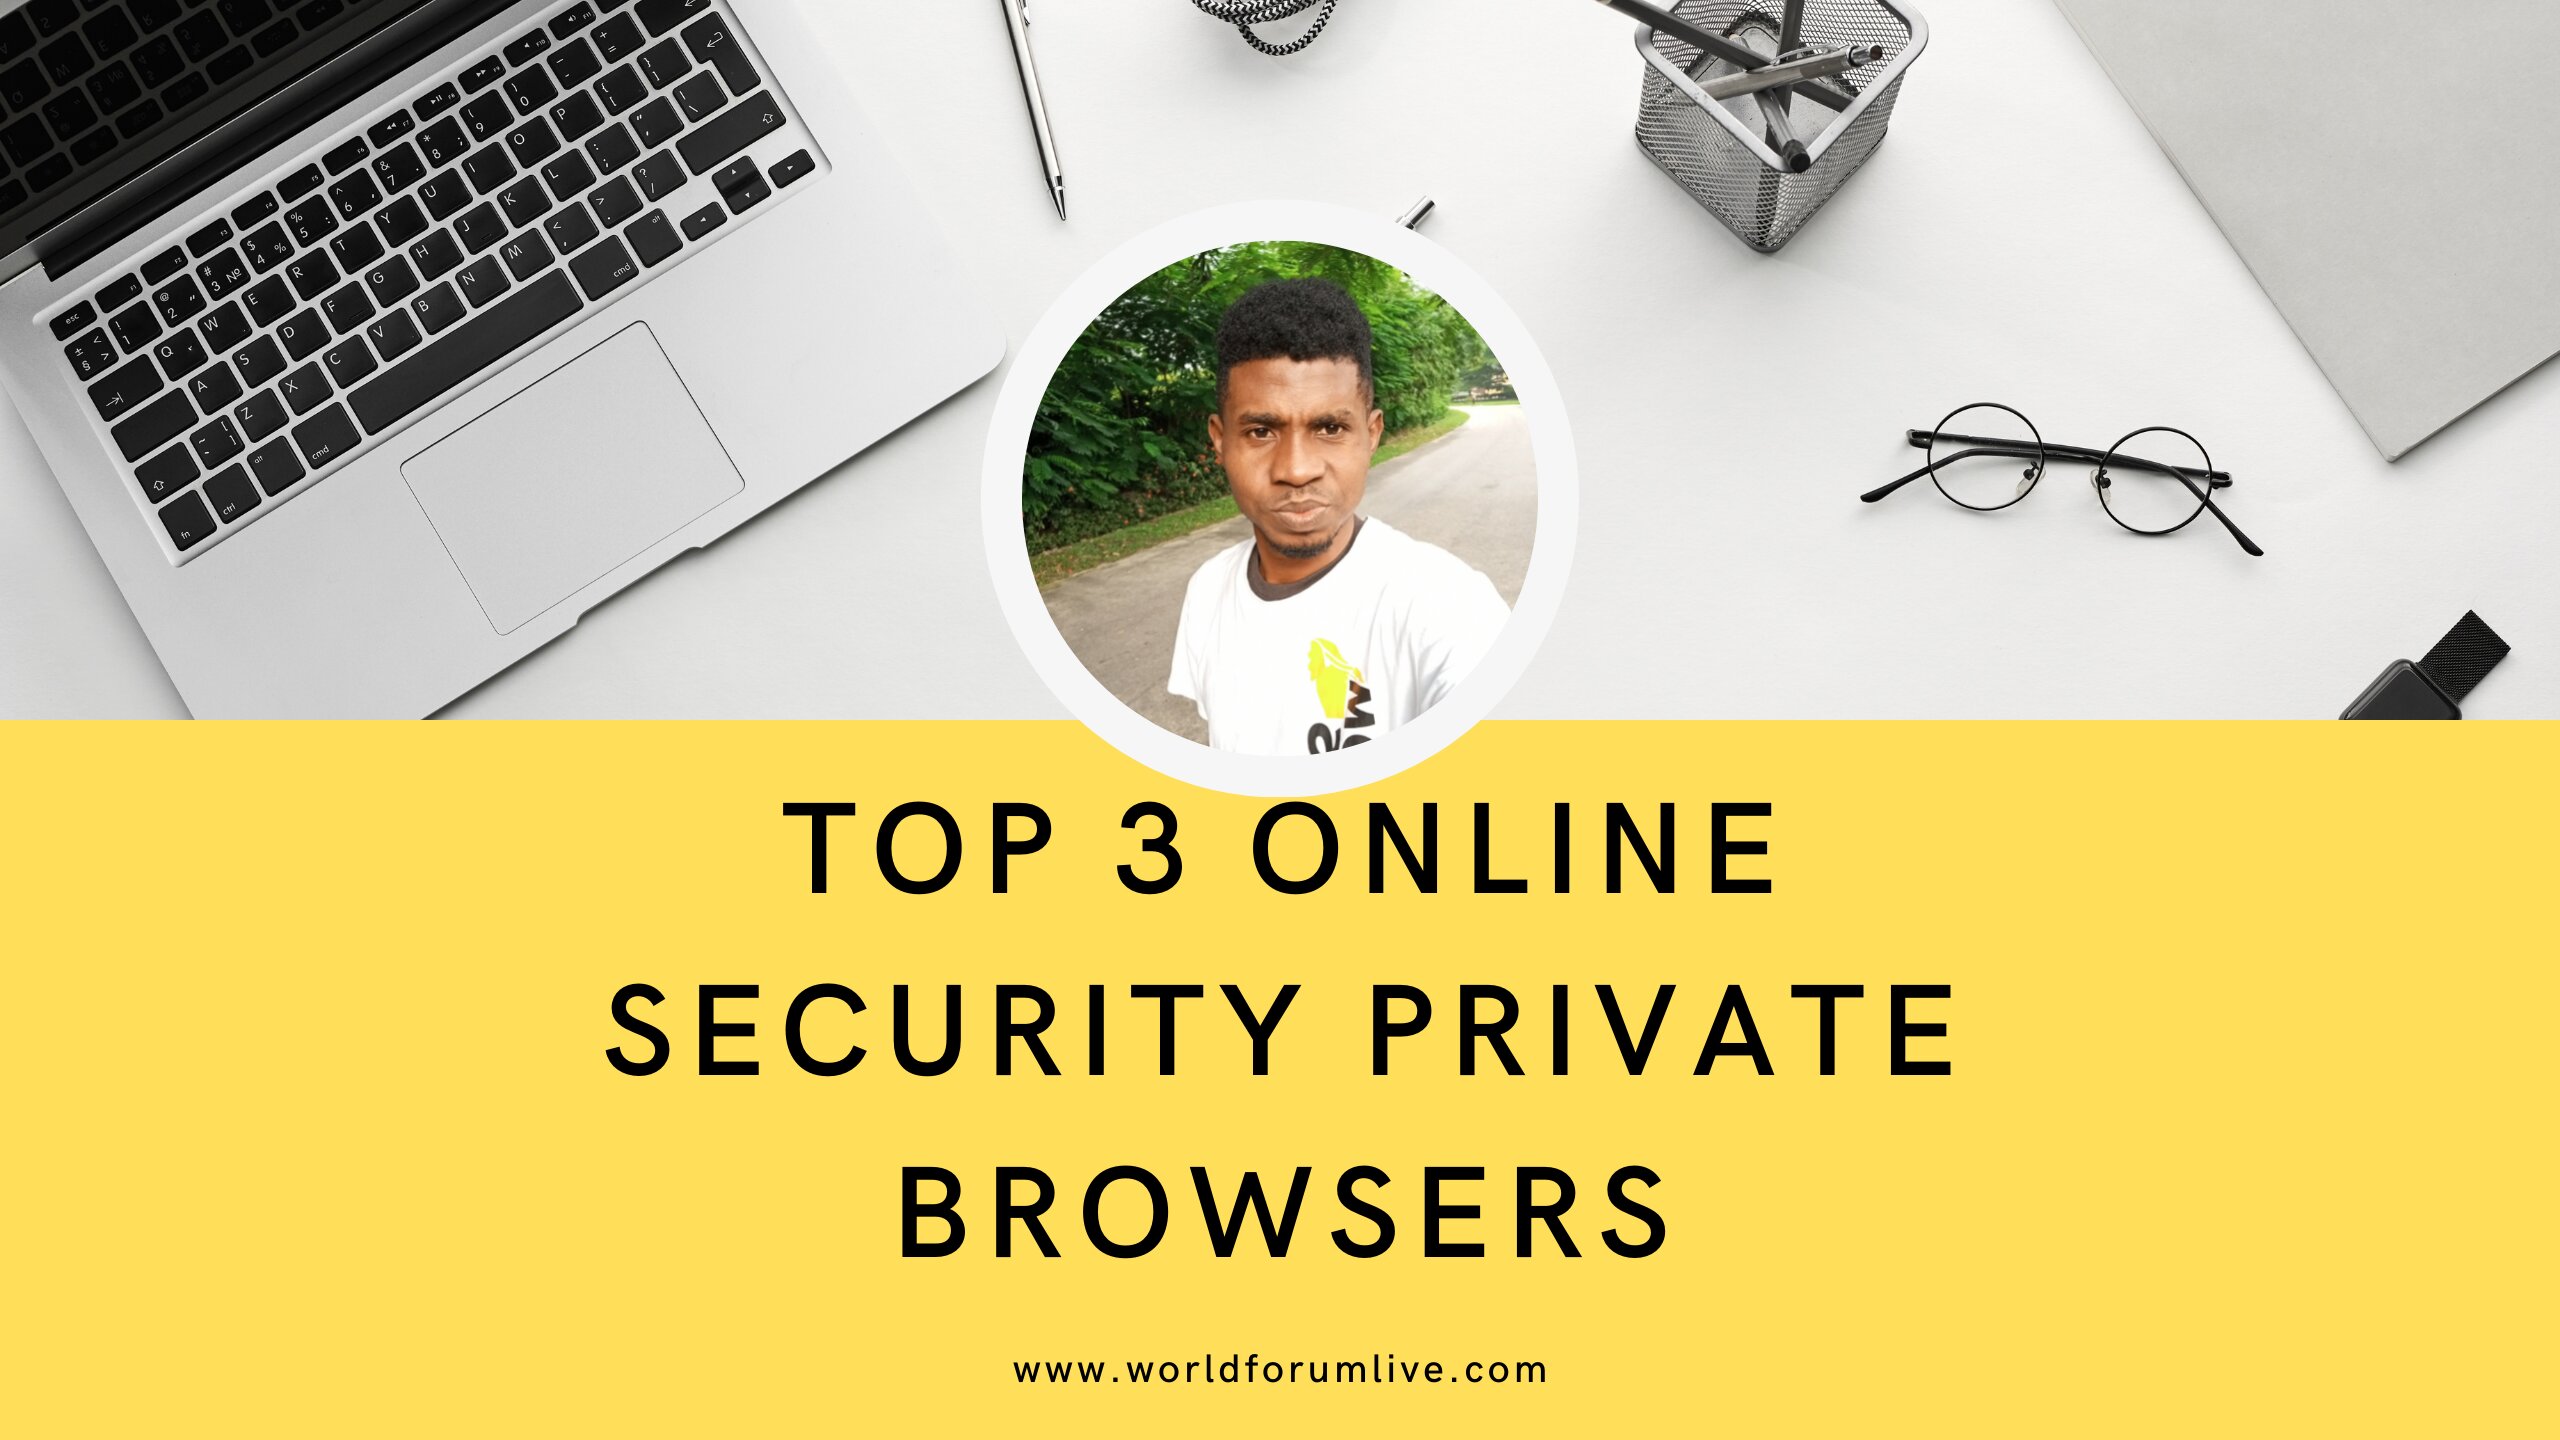 Top 3 Online Security Private Browsers.jpg